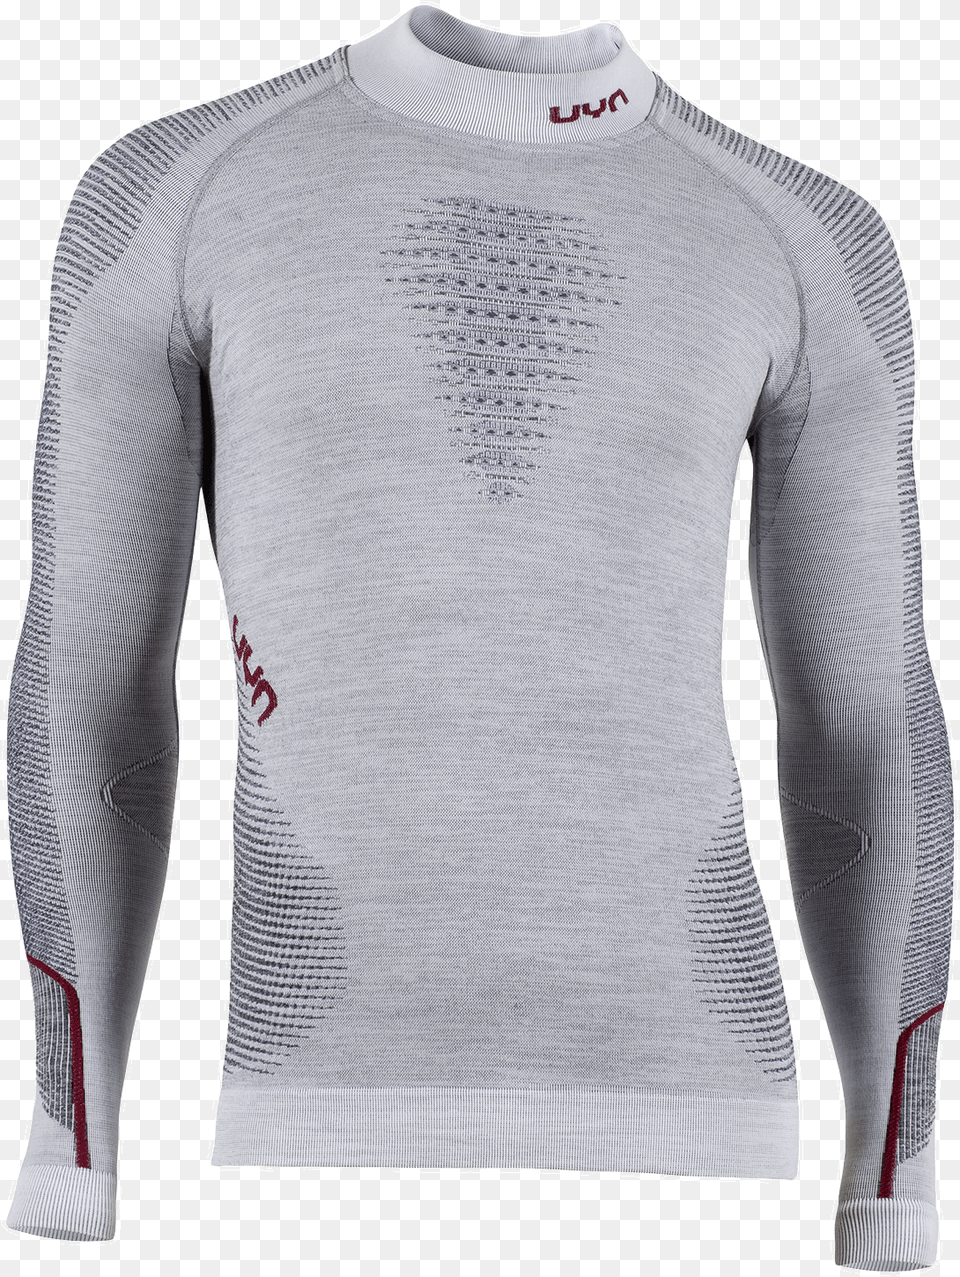 Tshirt Homme Manches Longues Et Col Chemine, Clothing, Long Sleeve, Sleeve, Knitwear Png Image